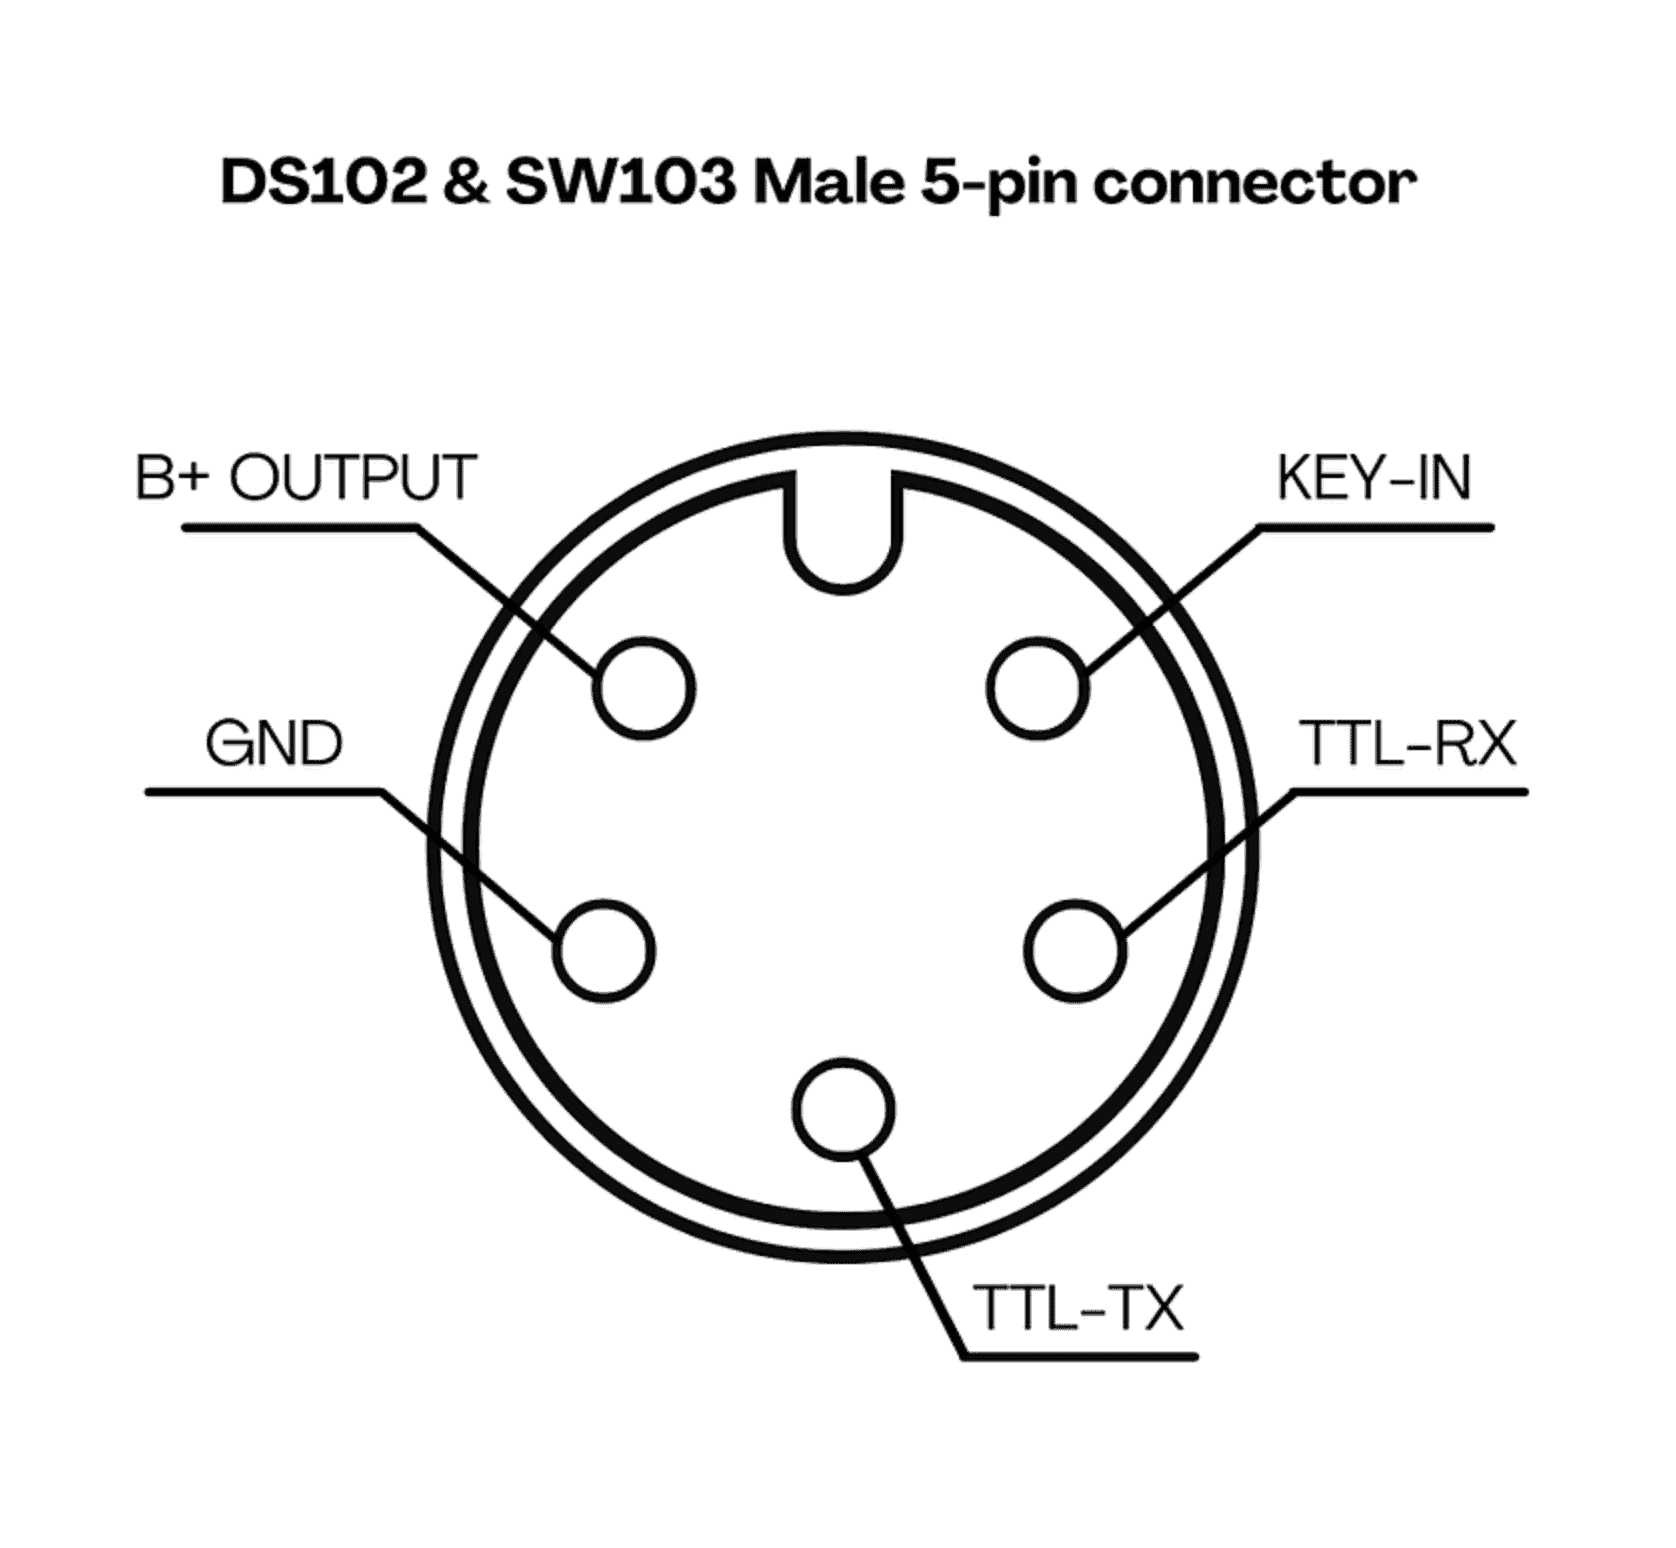 A drawing of the ds 1 0 2 and sw 1 0 3 connector.